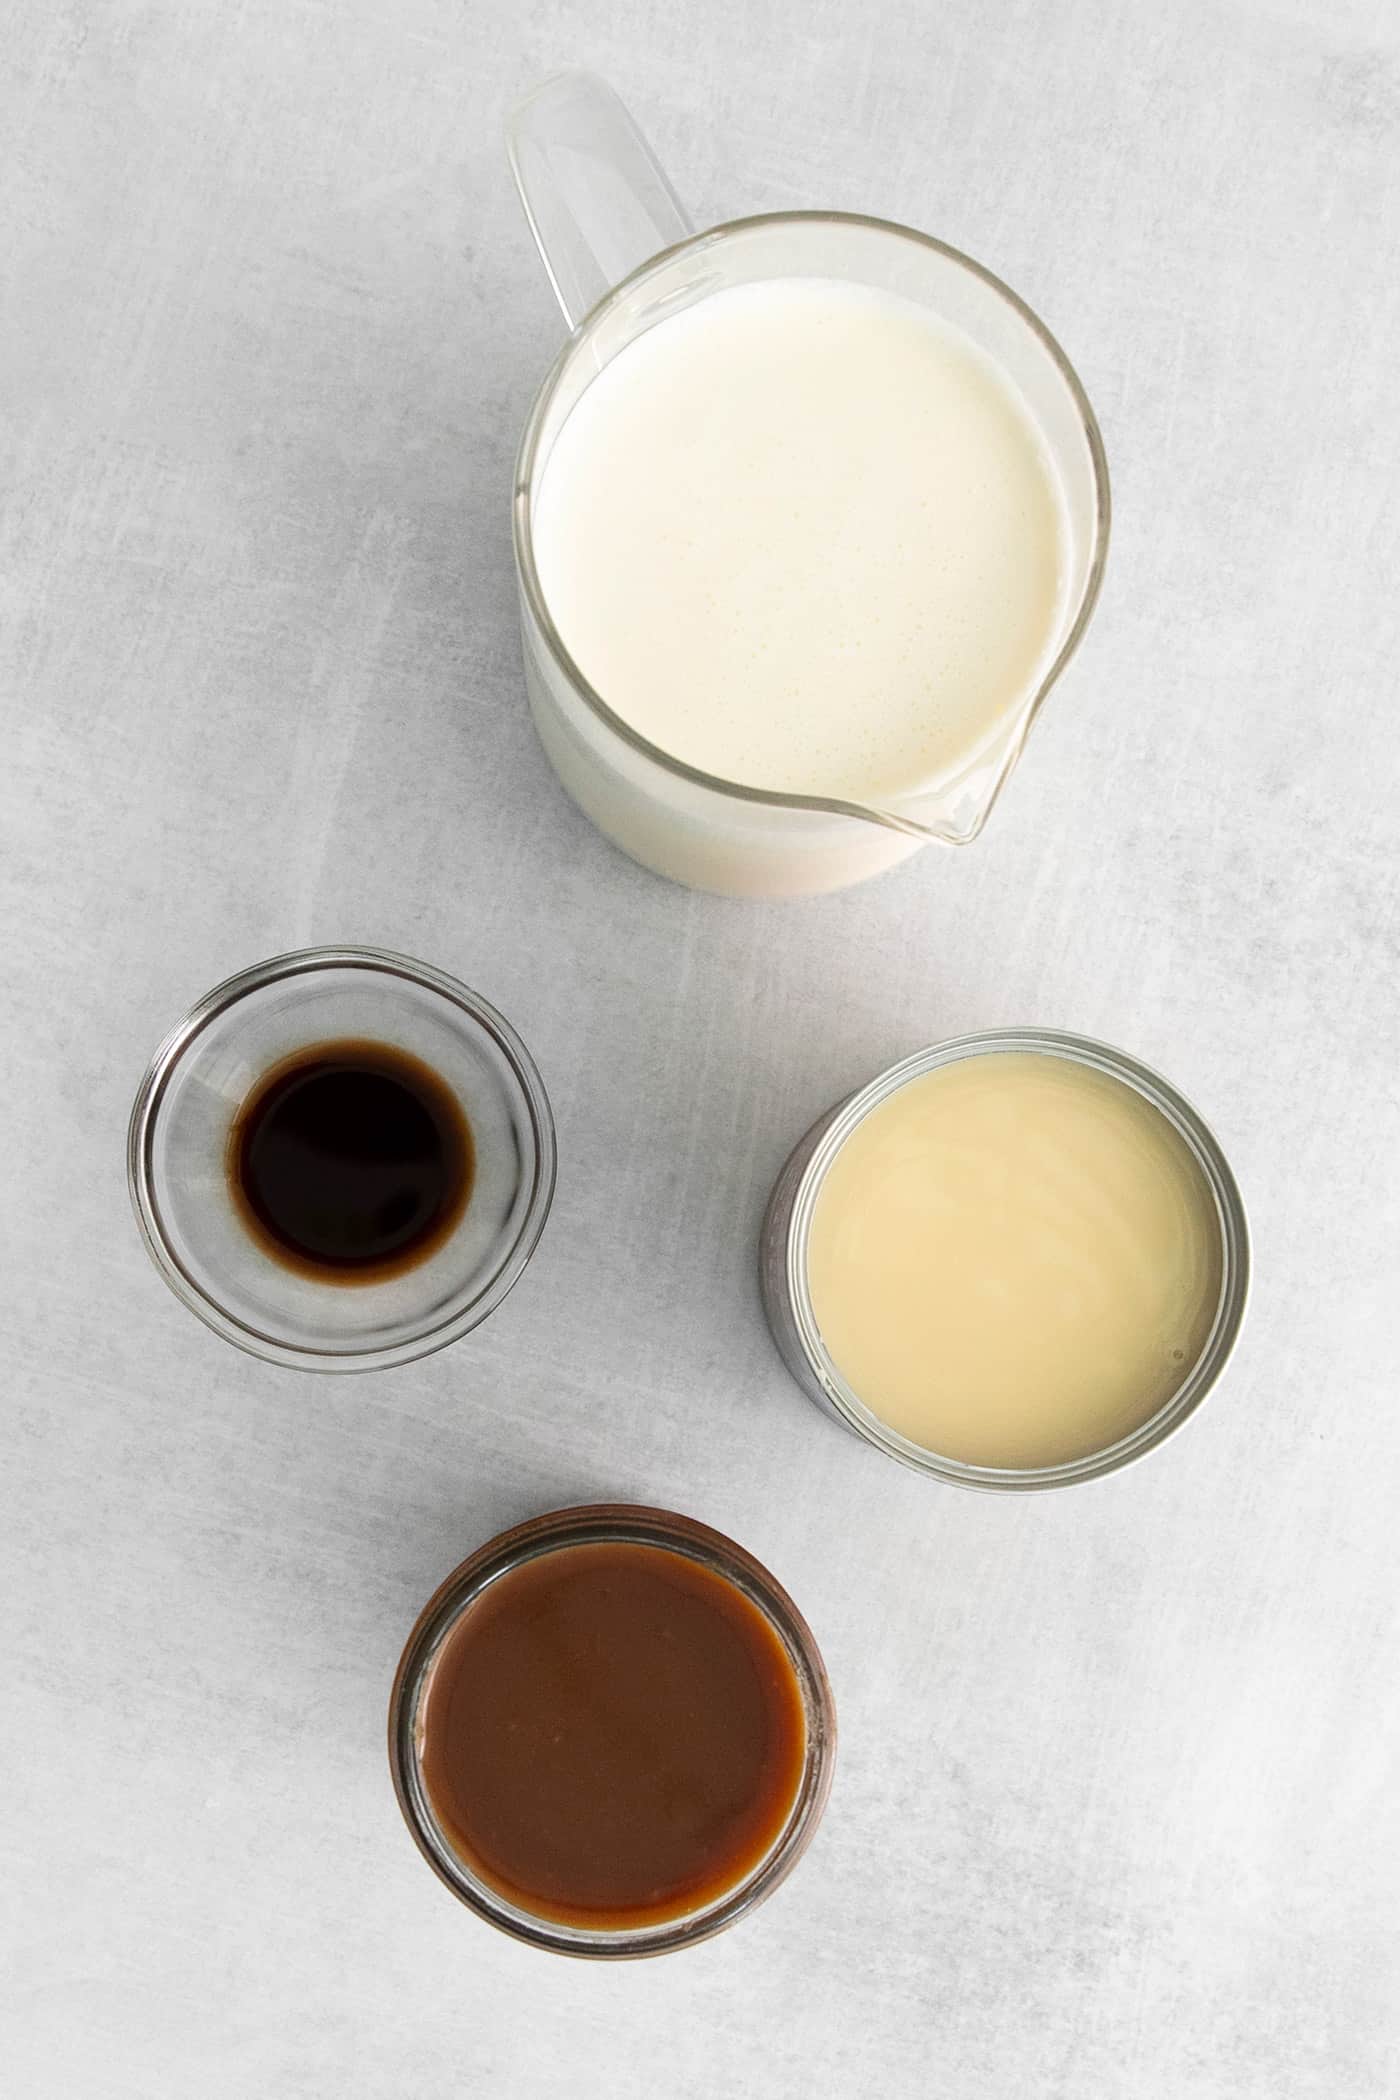 Overhead view of salted caramel ingredients